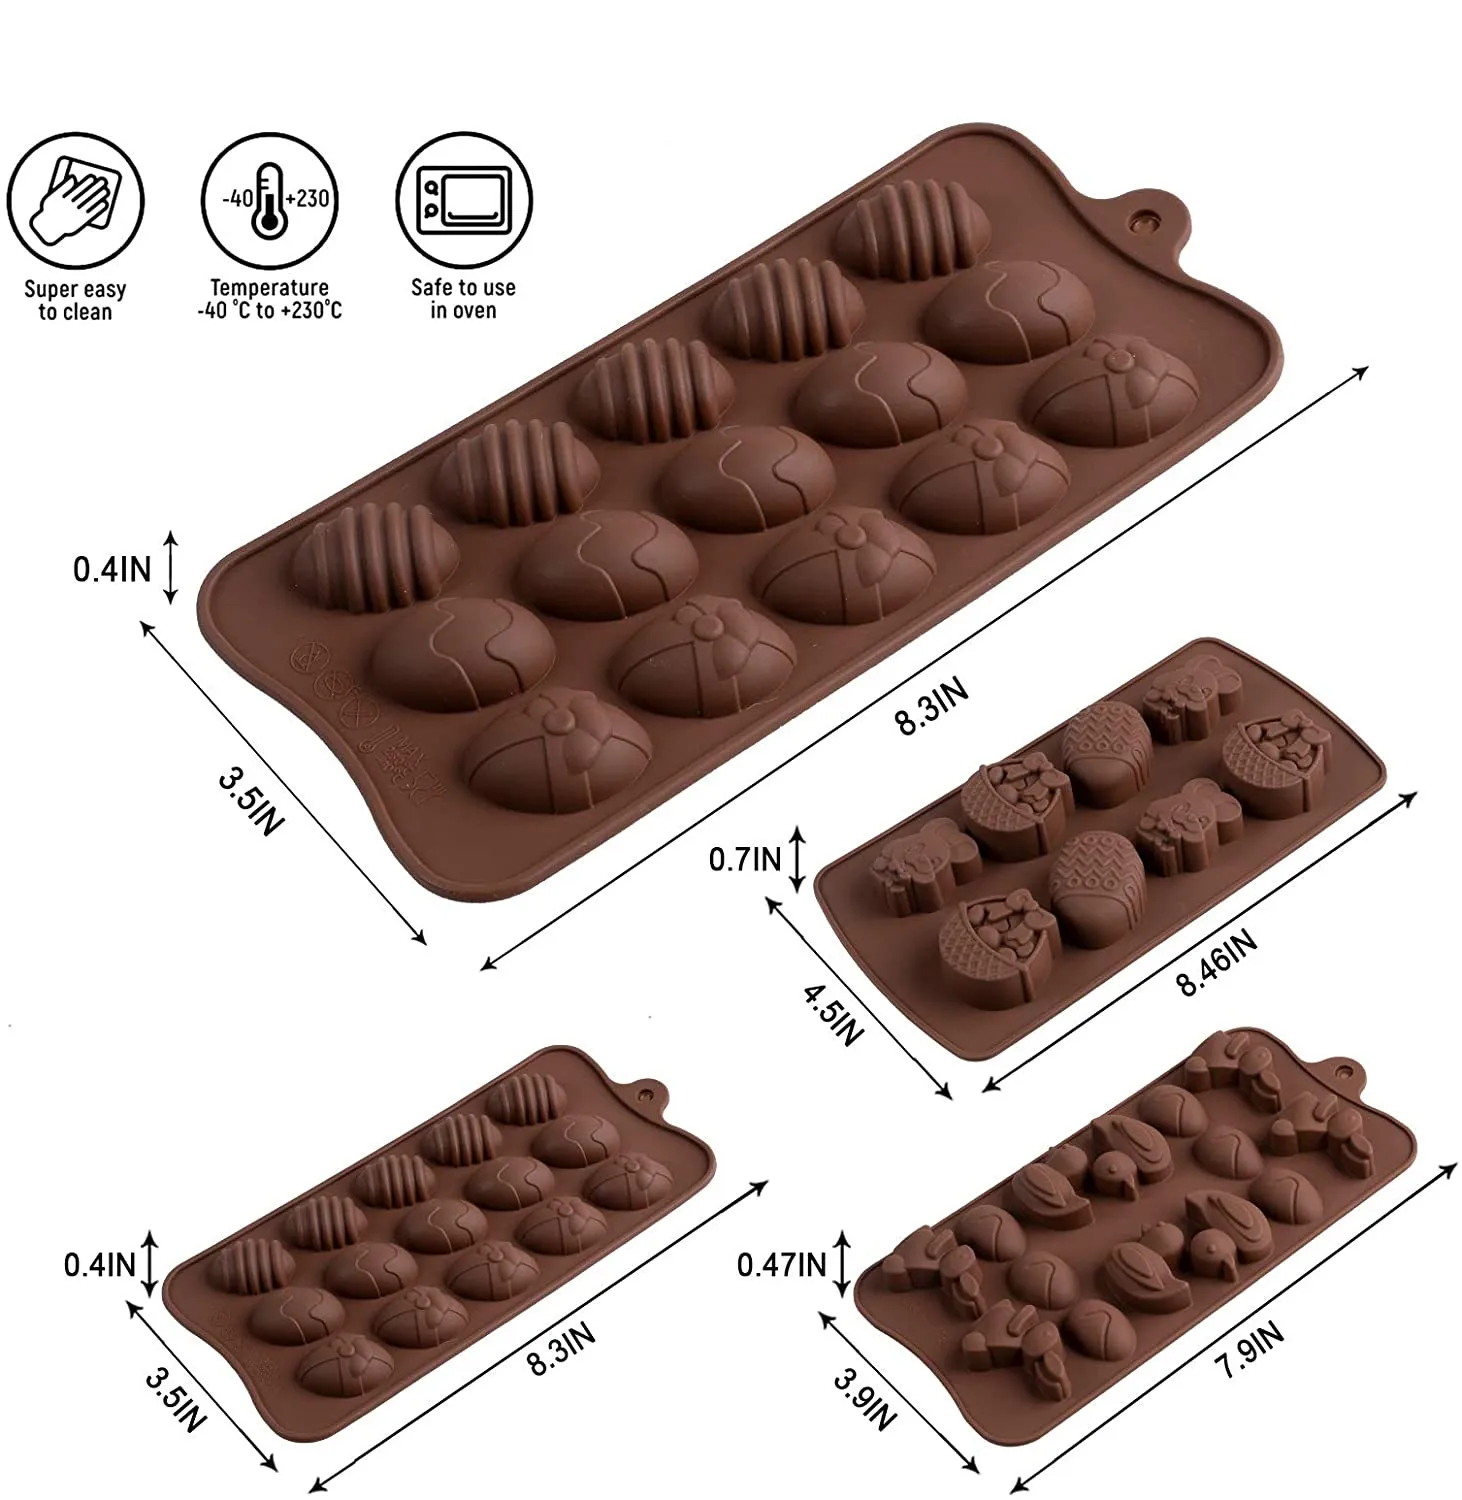 Customized Easter Chocolate Molds Wholesale Silicone Molds with Easter Egg Shape for Making Small Chocolate